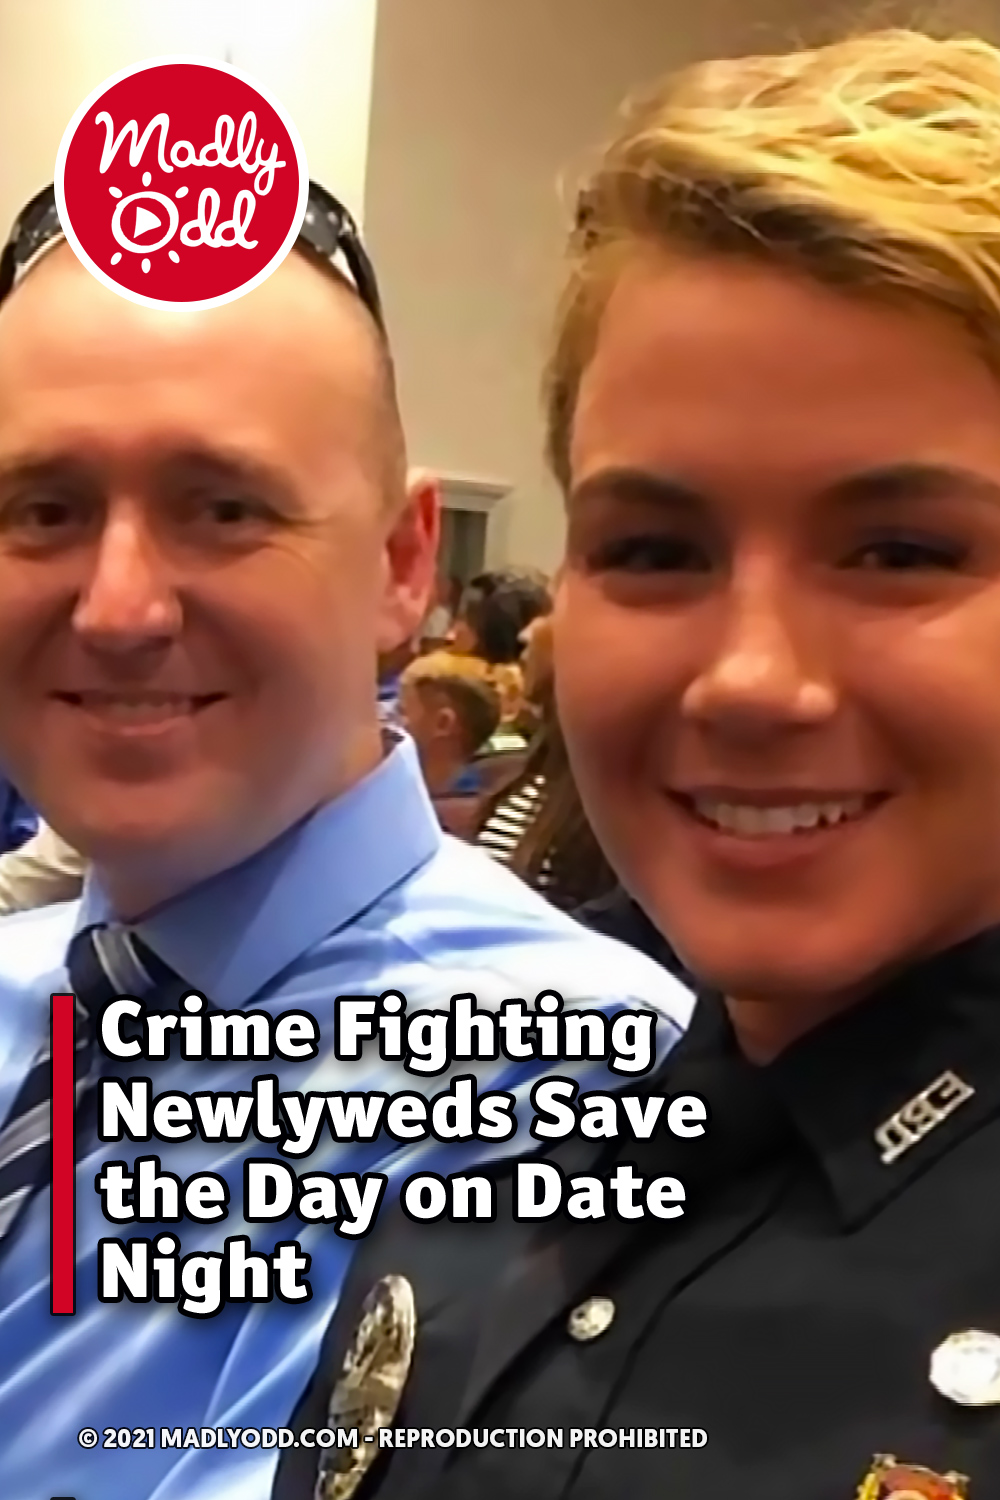 Crime Fighting Newlyweds Save the Day on Date Night